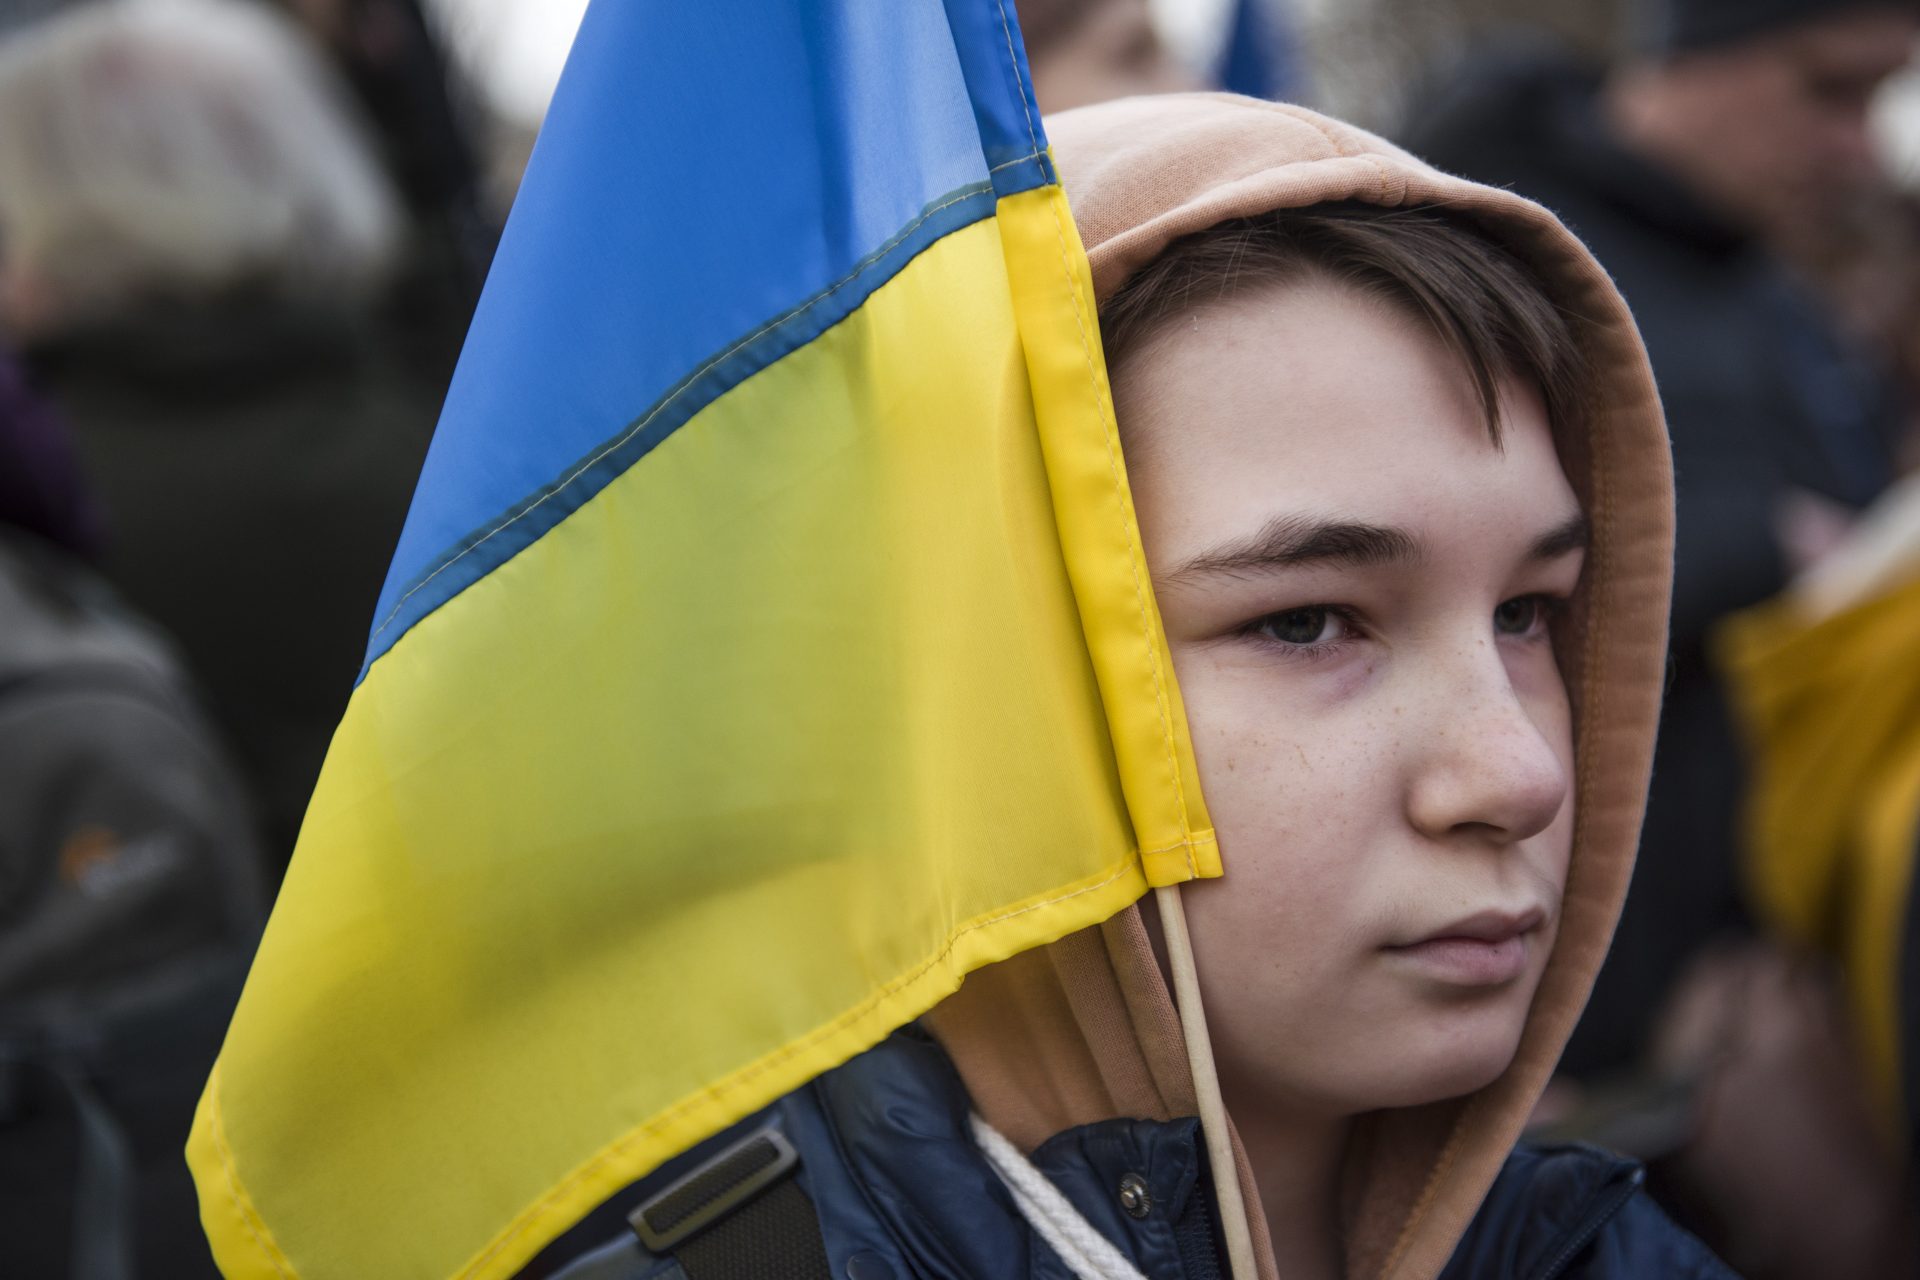 War isn't the only worrying thing on the minds of most Ukrainians